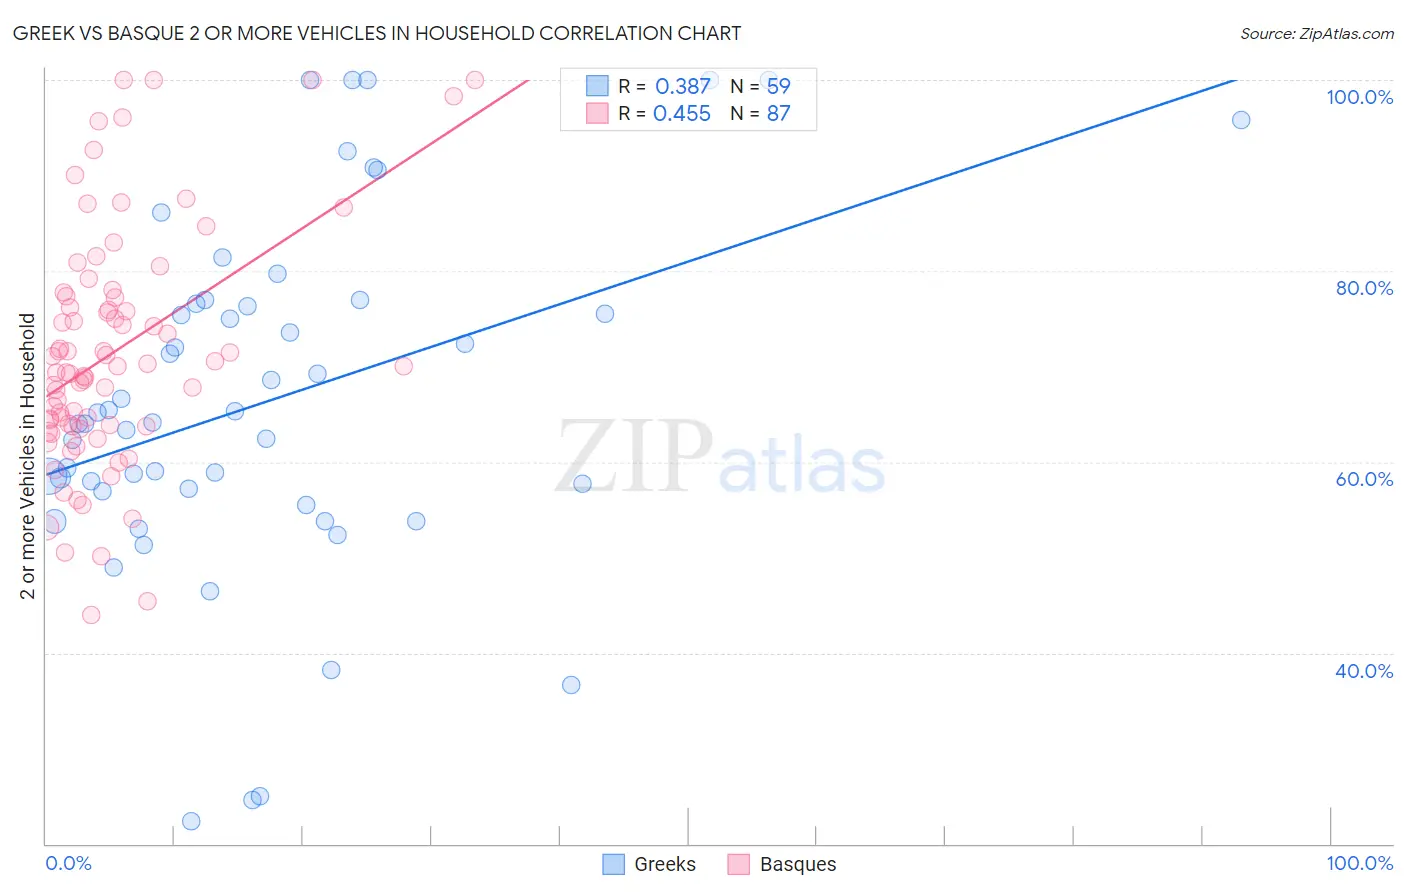 Greek vs Basque 2 or more Vehicles in Household